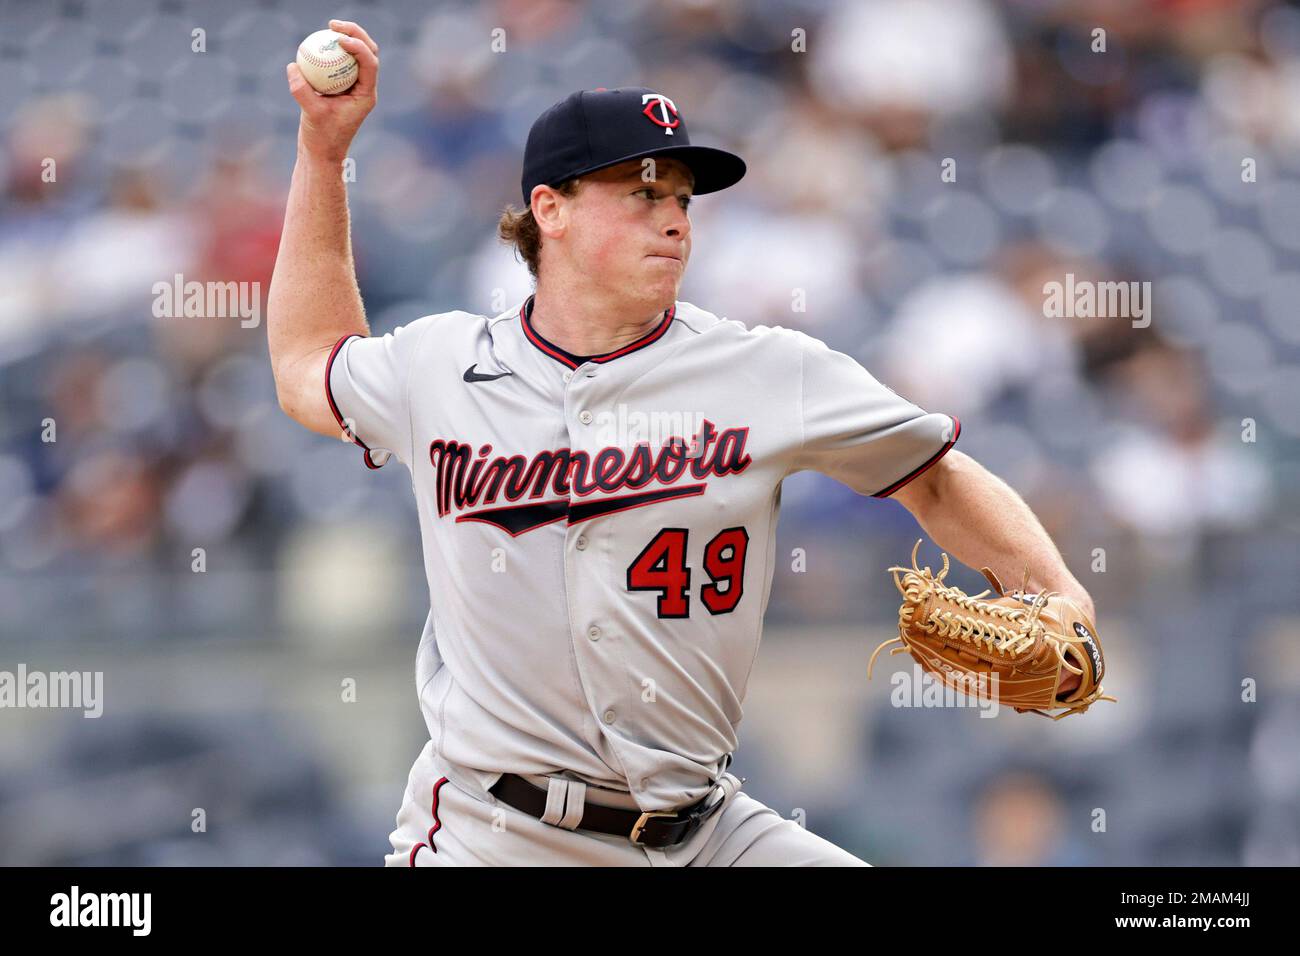 Minnesota Twins pitcher Louie Varland throws during the sixth